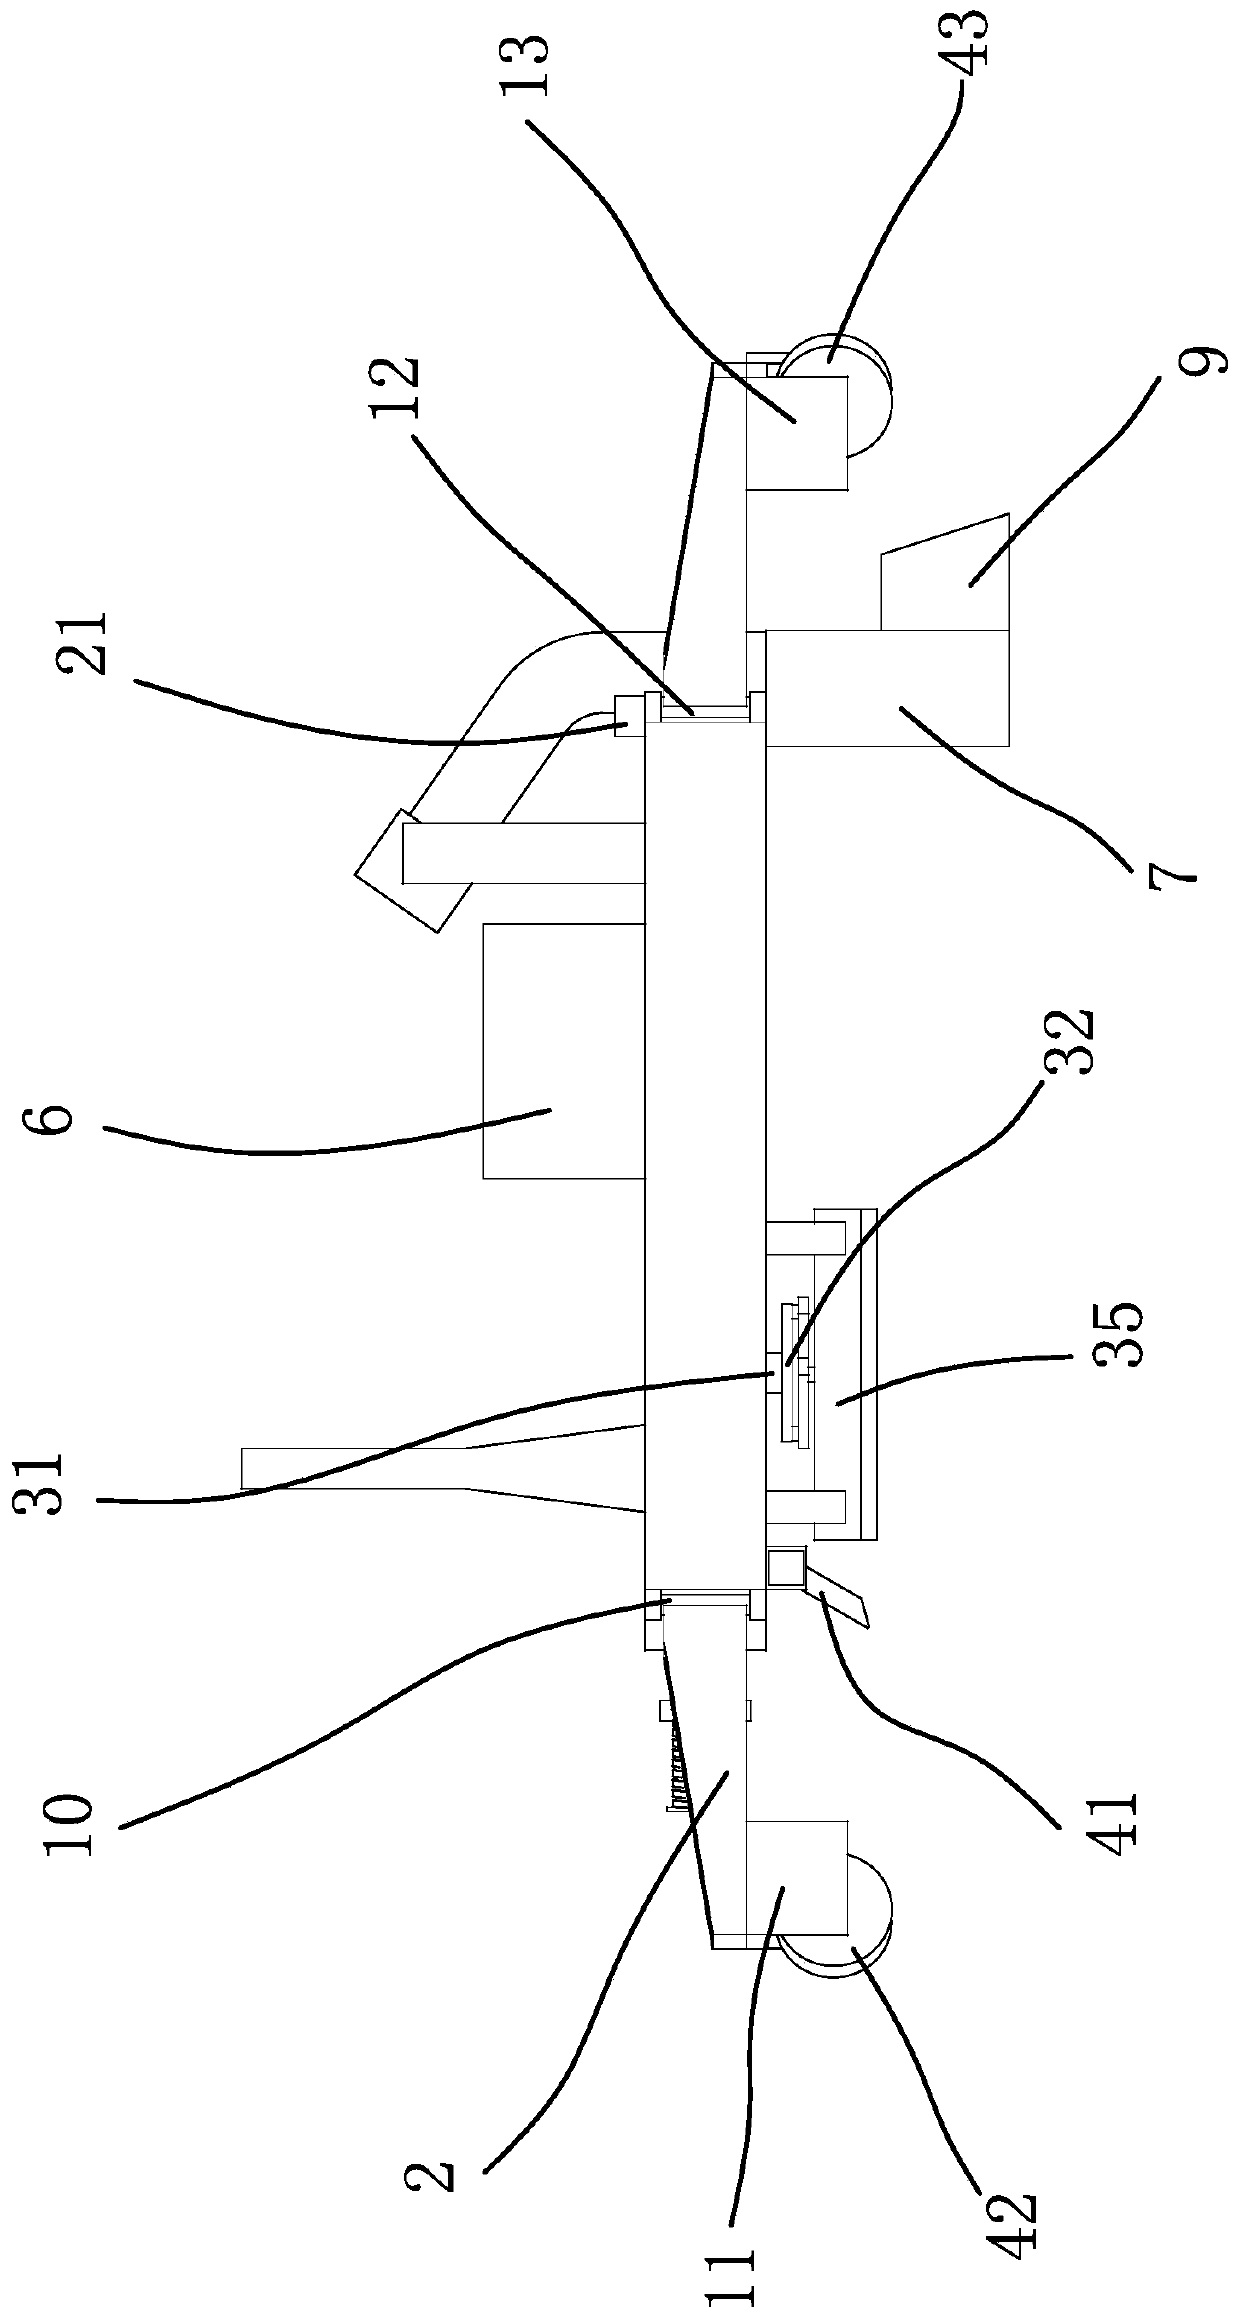 Large-diameter optical cable direct-buried laying construction vehicle